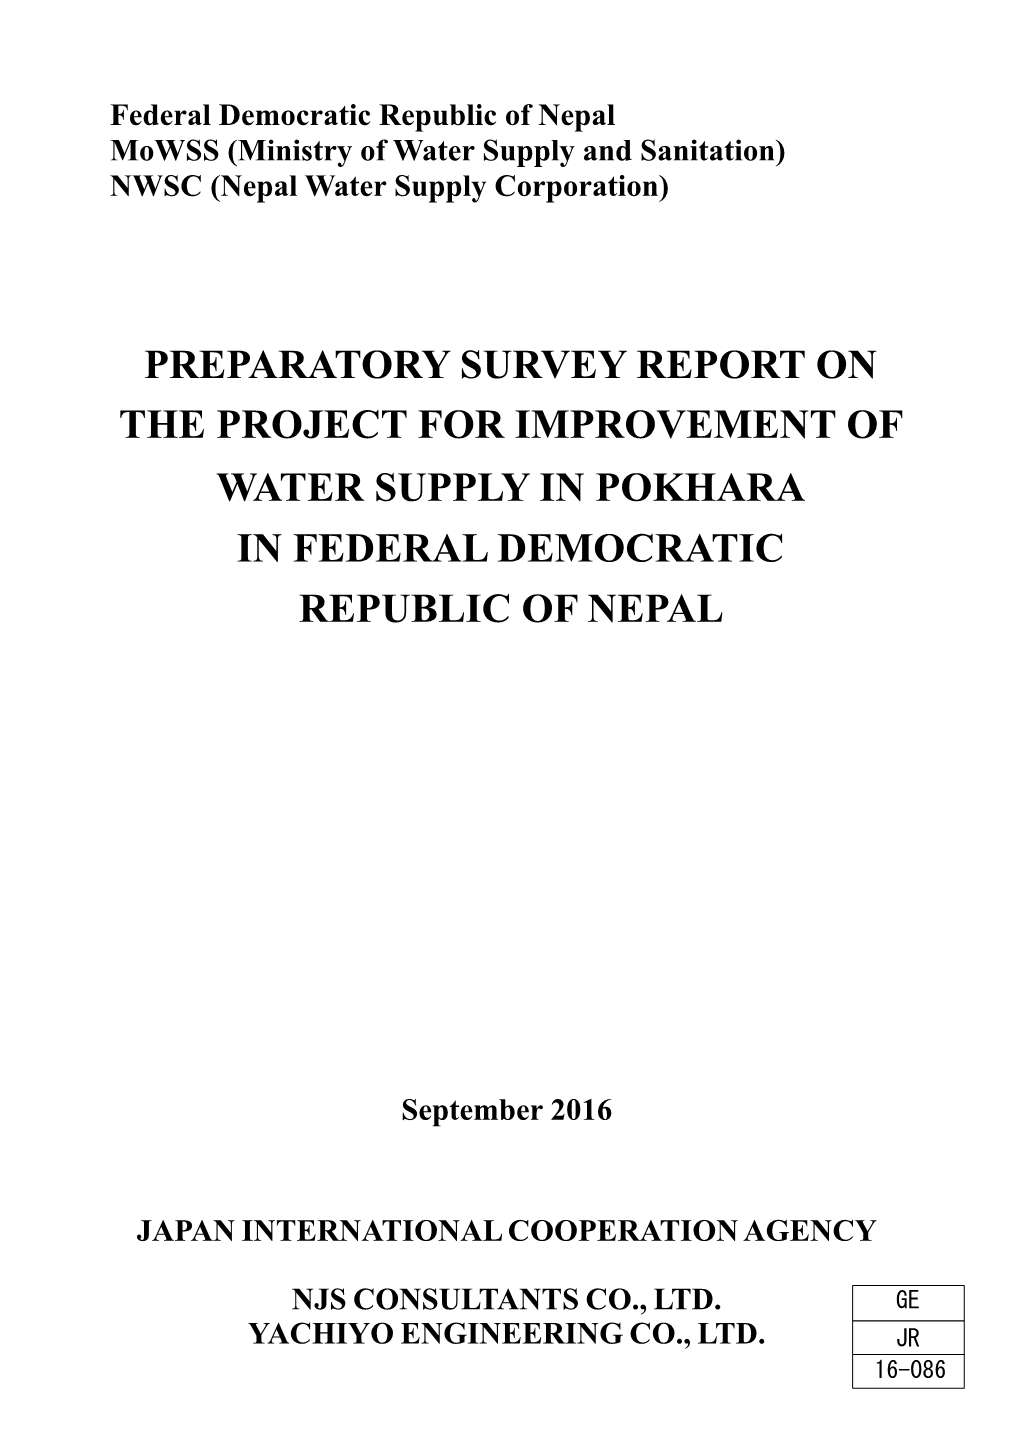 The Project for Improvement of Preparatory Survey